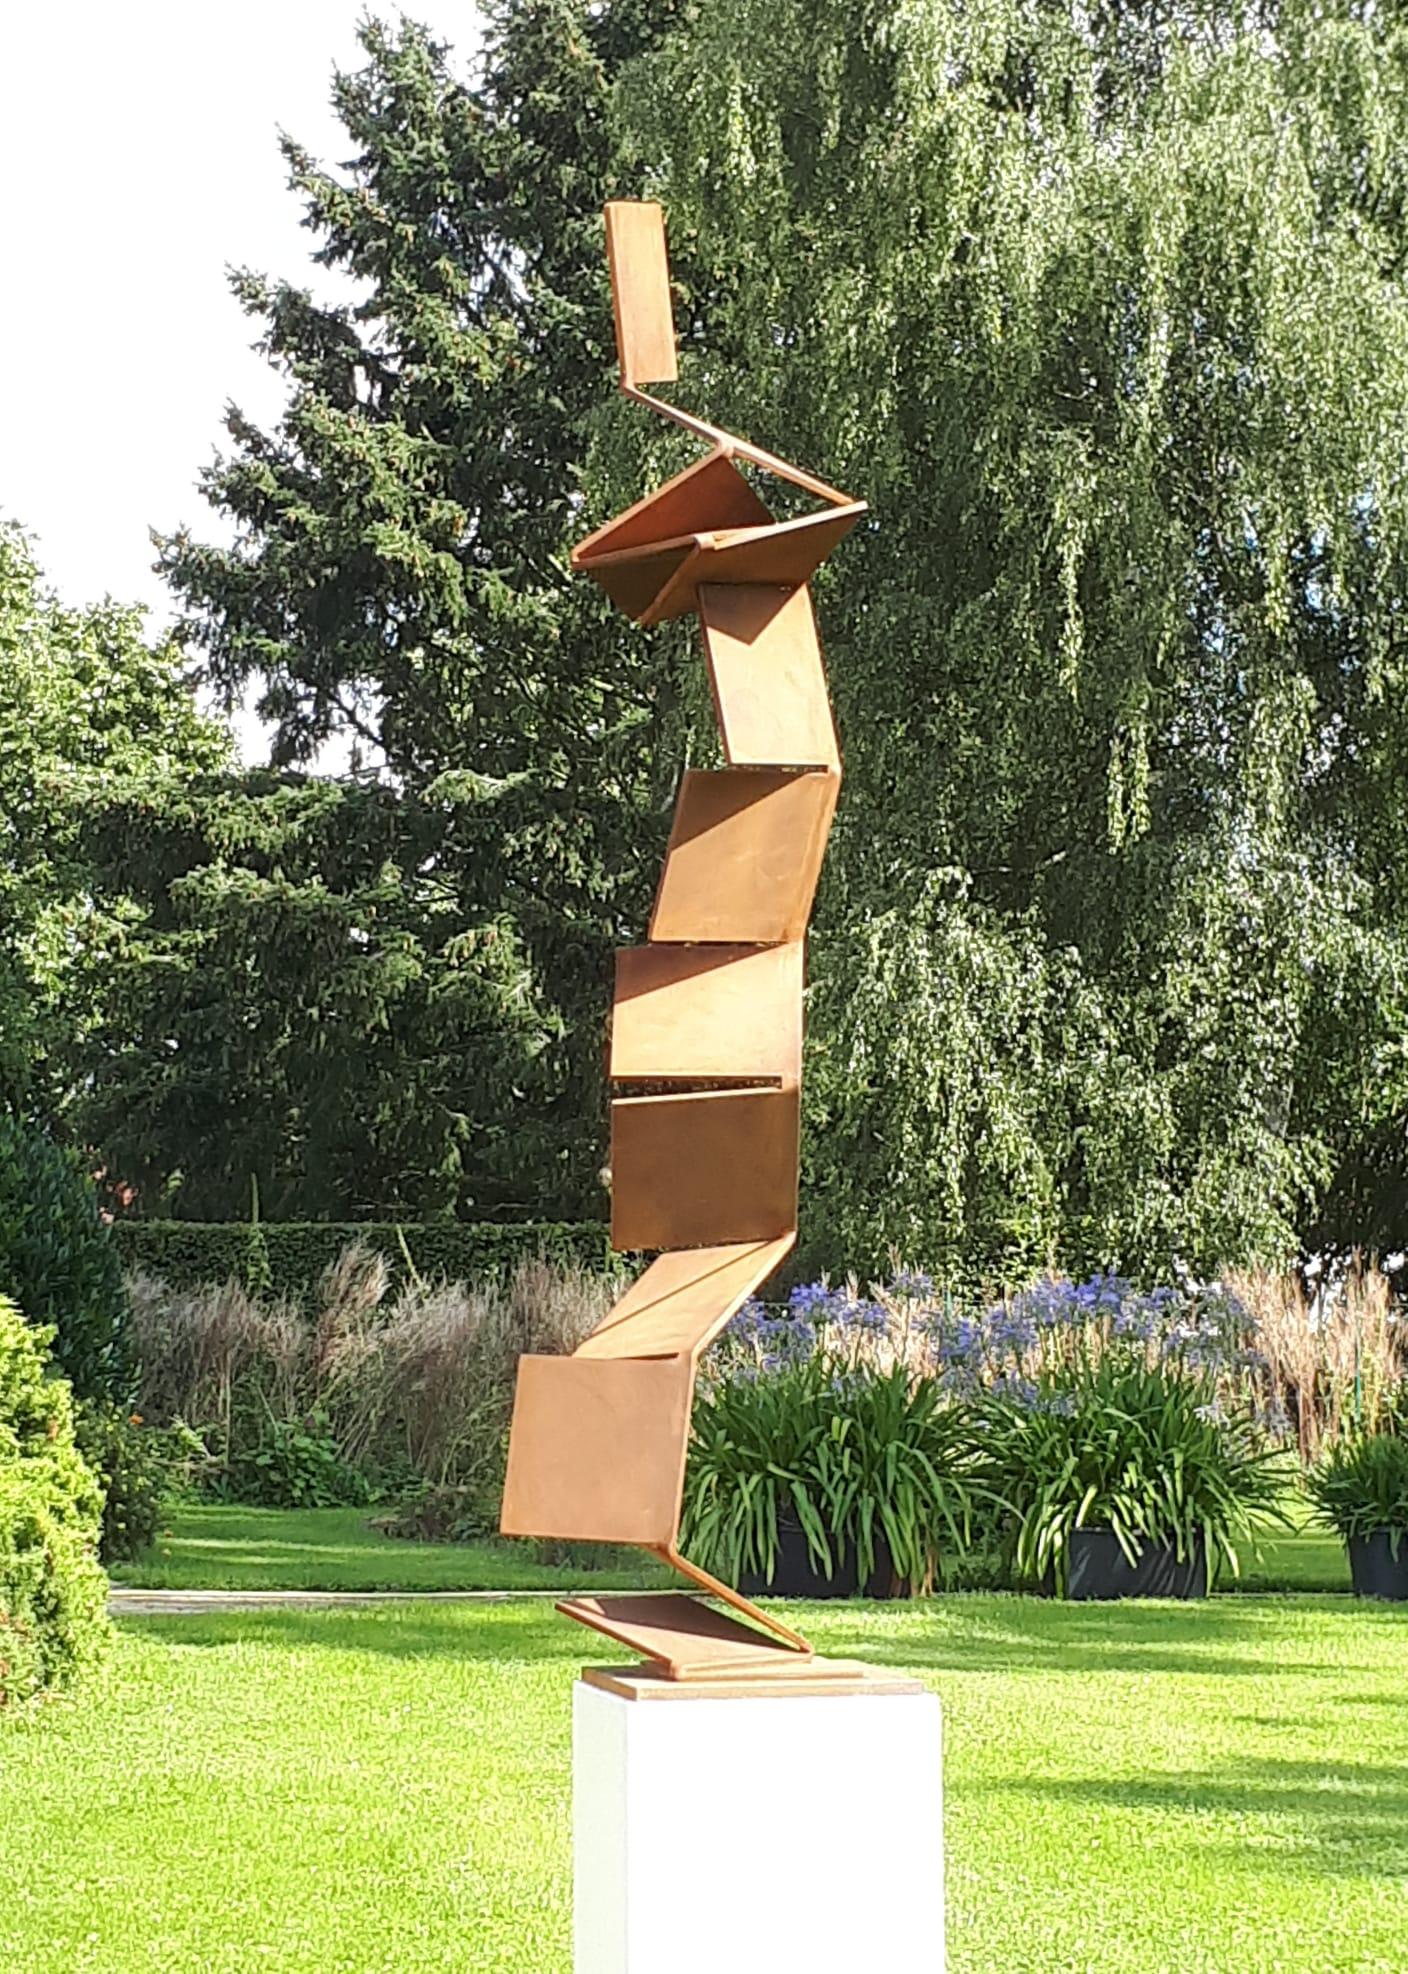 Artist: Kuno Vollet

Title: Aspiring Path

Contemporary rusted steel sculpture for inside or garden outdoor spaces.

Stunning large artwork. Possible to put on a pedestal or directly on to the ground.

Born in 1951 in Petersaurach, located in Upper